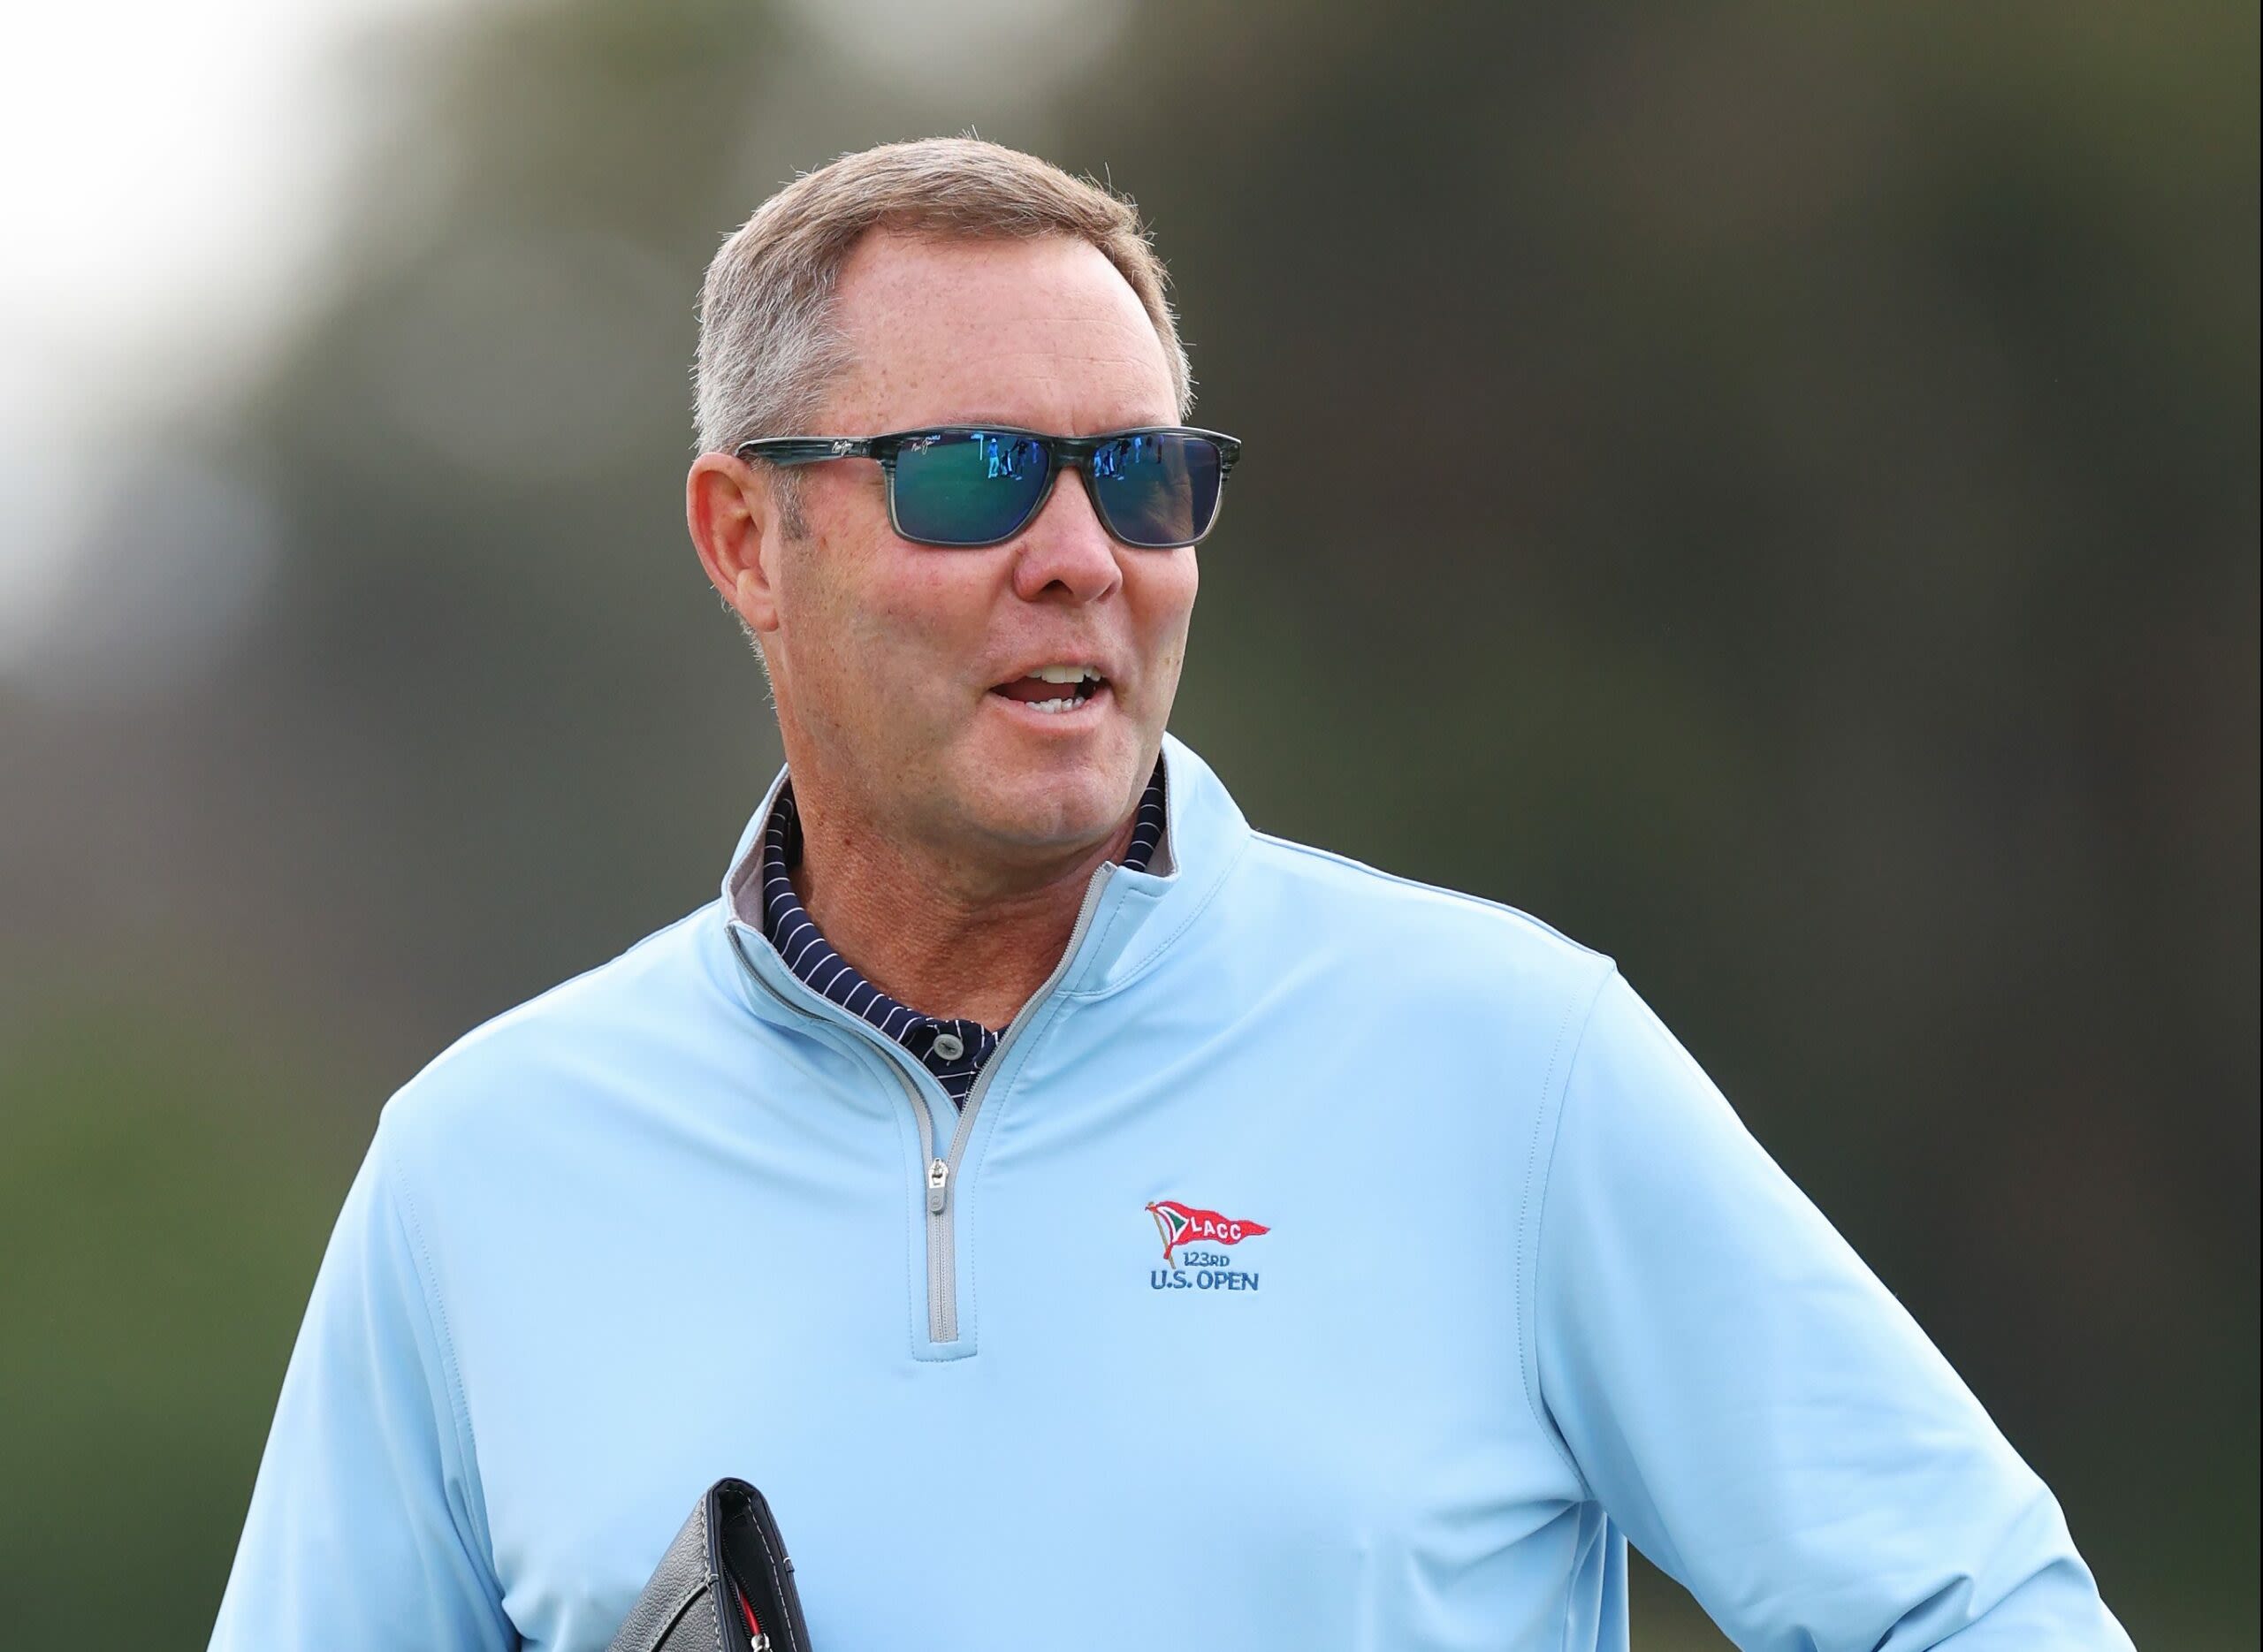 USGA CEO Mike Whan can envision a LIV Golf pathway to the U.S. Open, just not yet